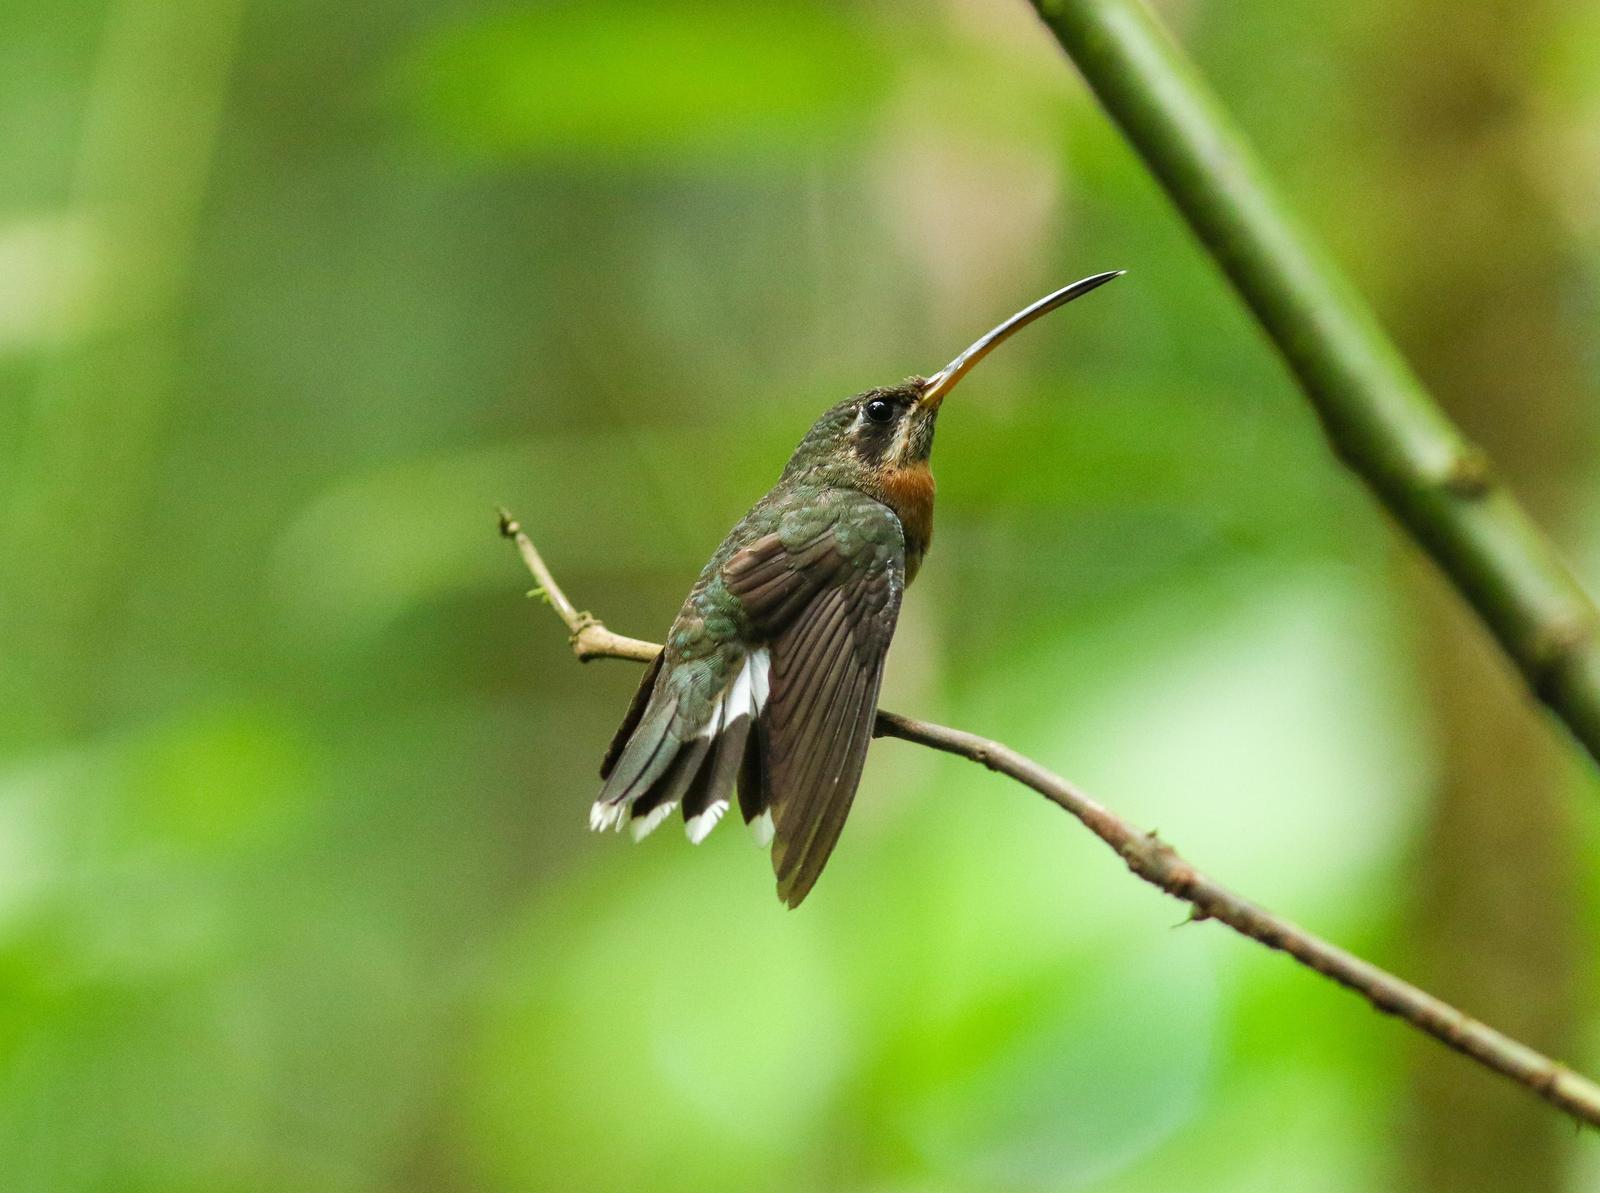 Band-tailed Barbthroat Photo by Leonardo Garrigues